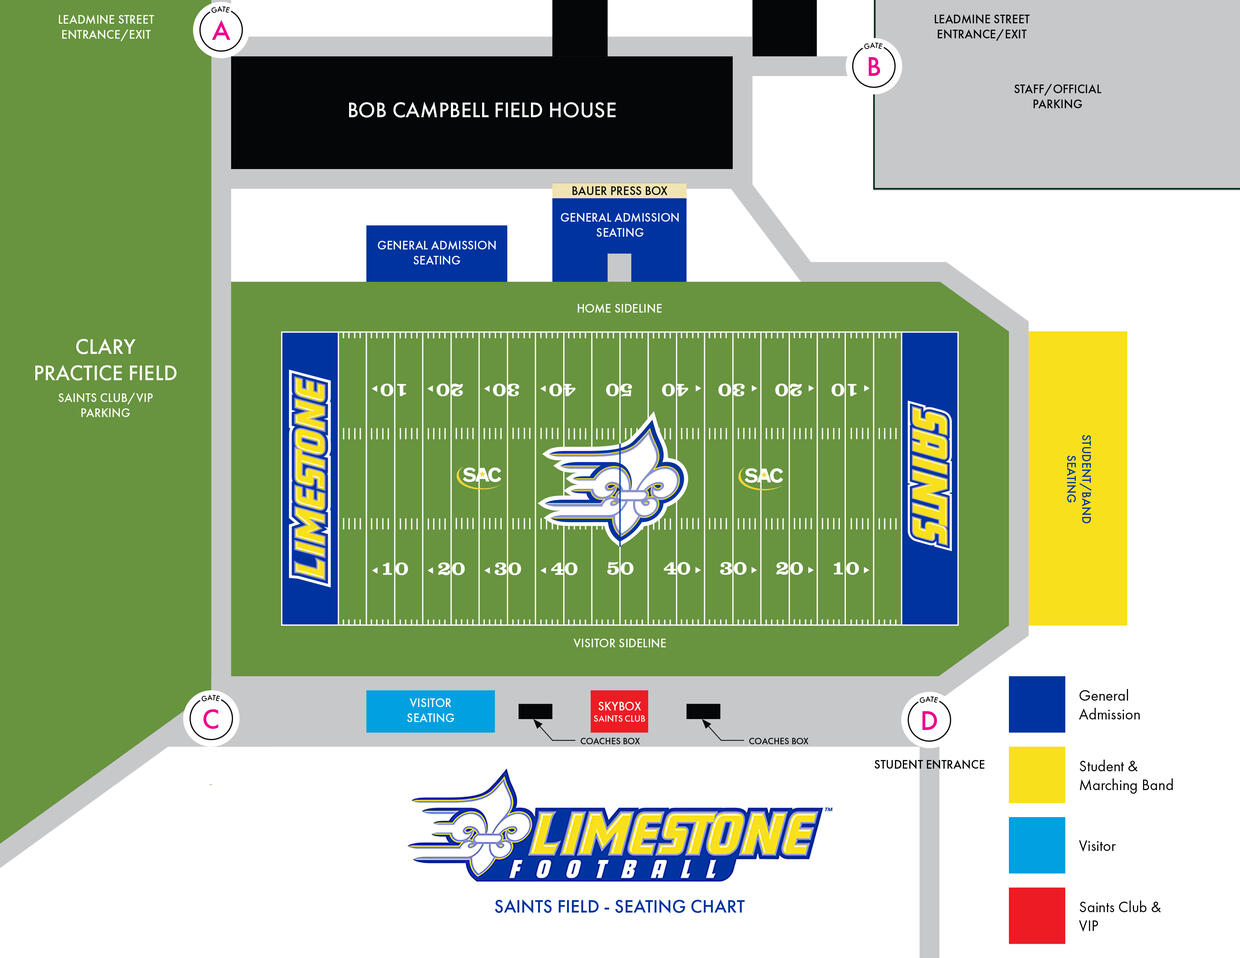 Student Section, General Admission Seating Announced For Limestone's